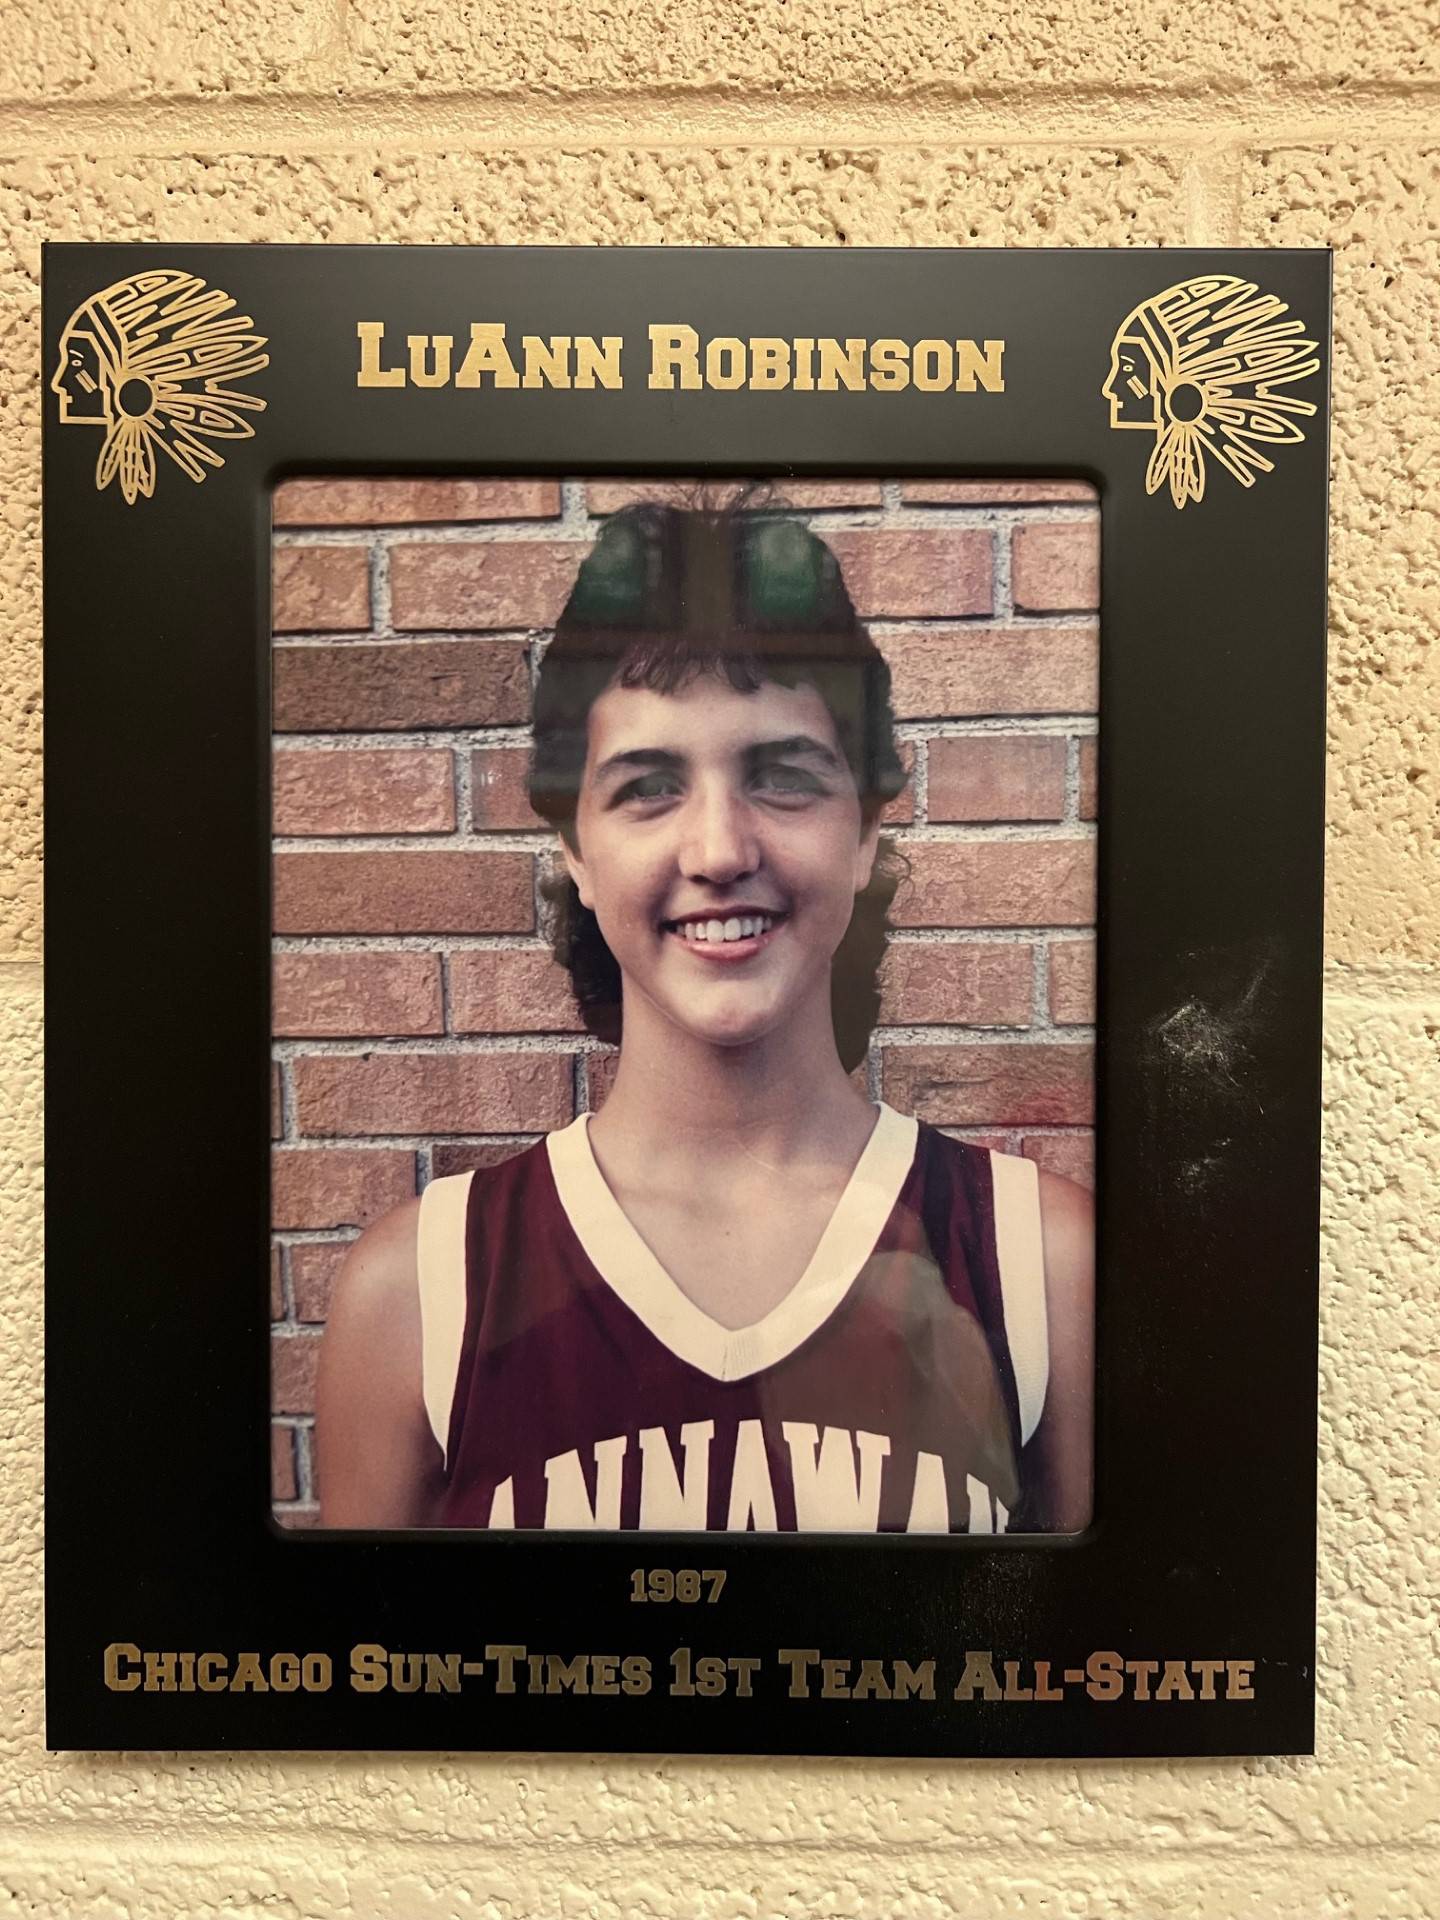 LuAnn Robinson was an All-State player for Annawan from the class of 1988.